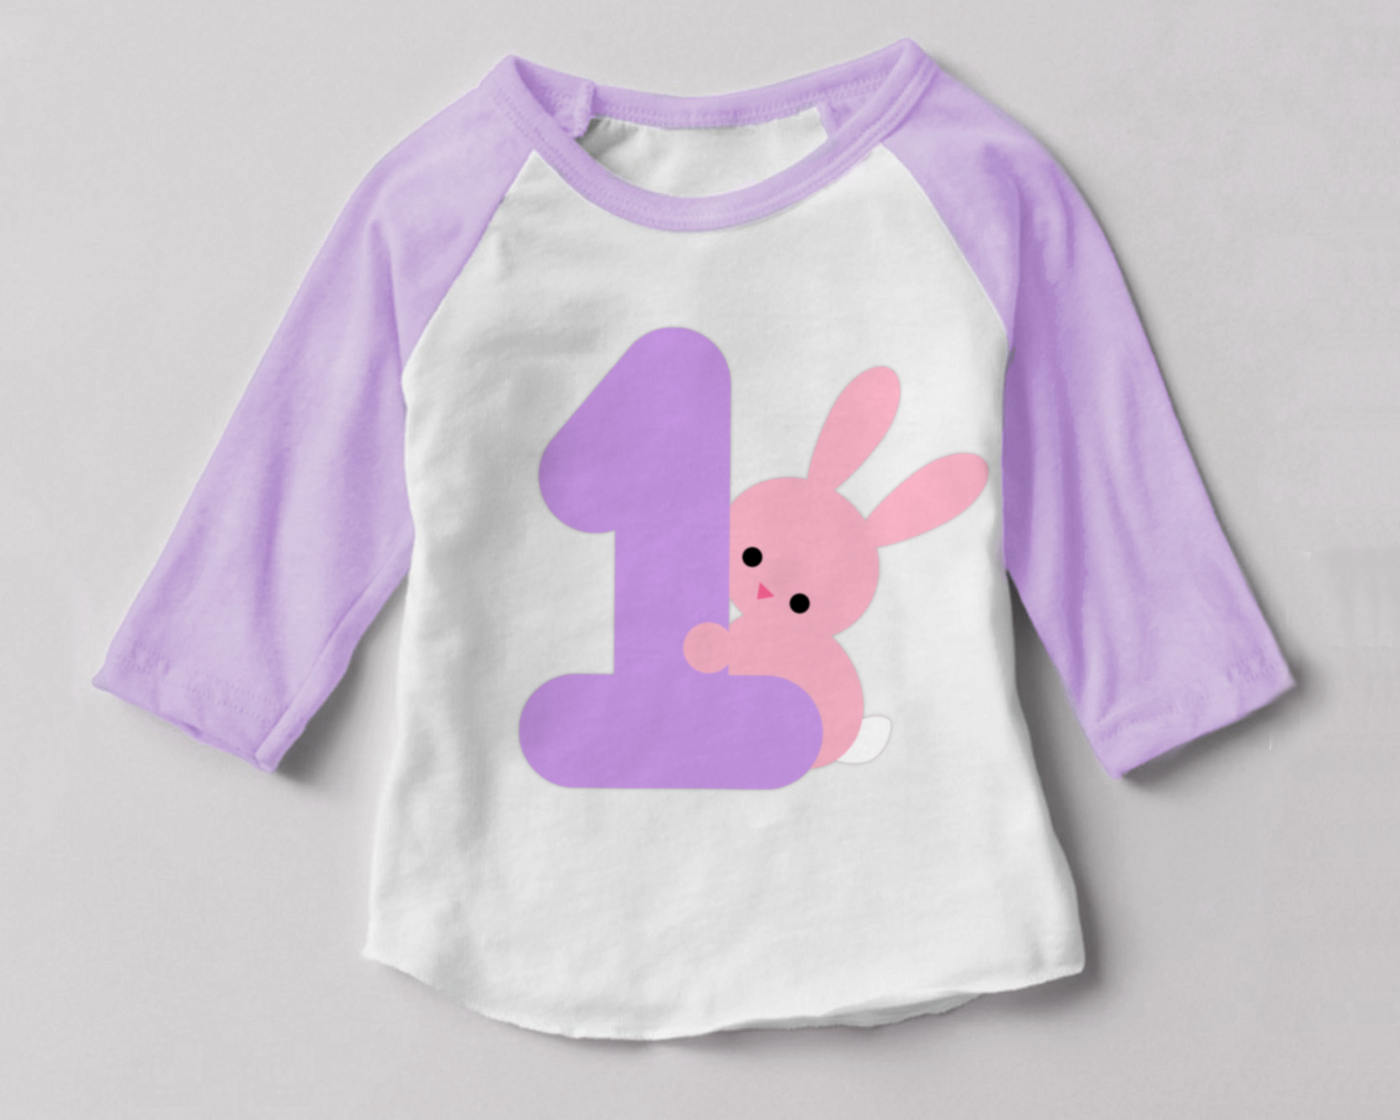 Baby raglan tee with a large 1 on it. Behind the number is a cute bunny.